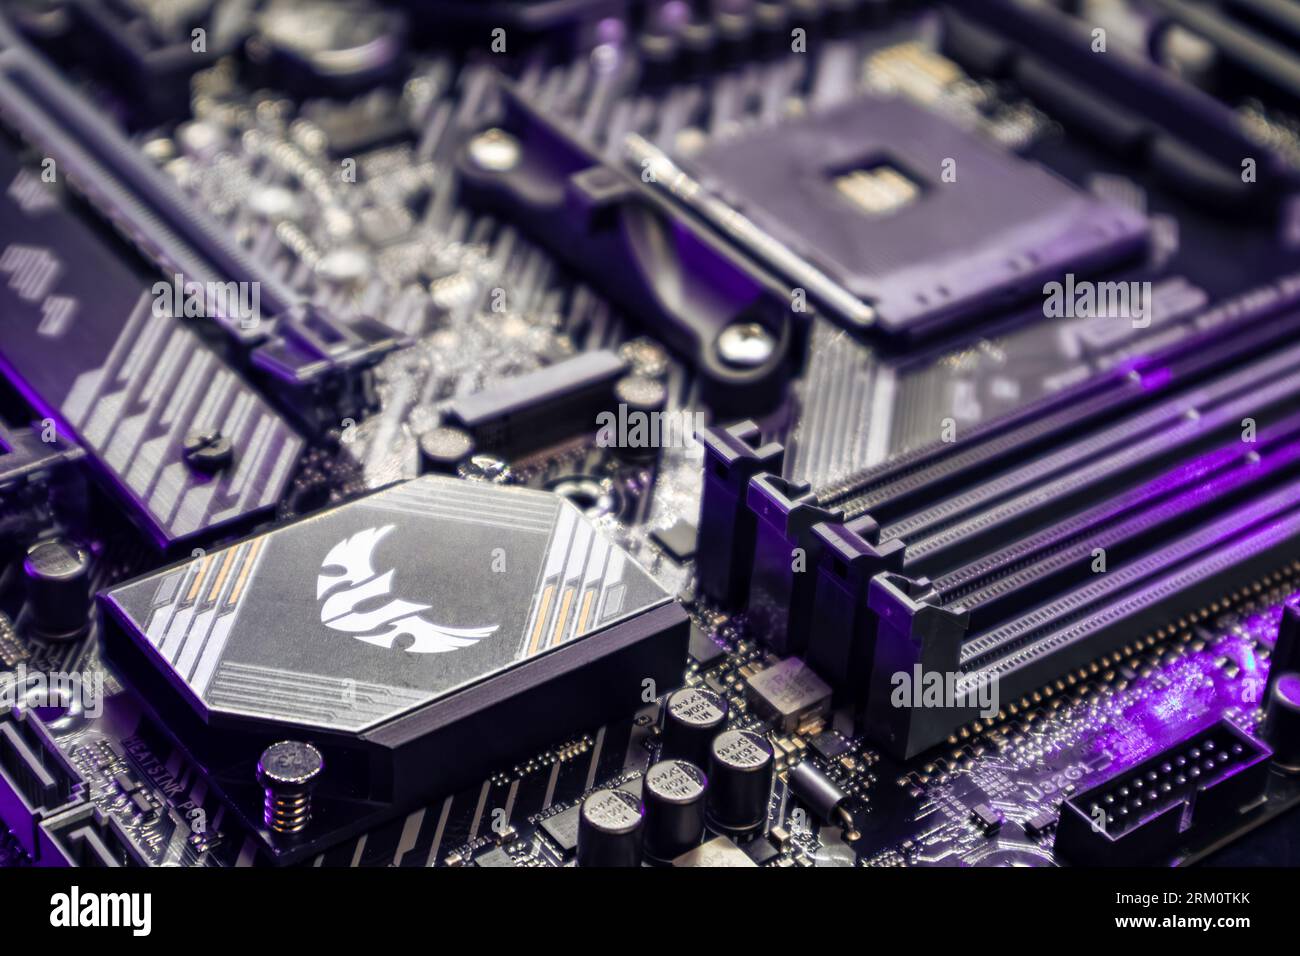 Kyiv, Ukraine - January 05, 2022: Asus Tuf Gaming modern PC motherboard with AM4 CPU Socket. Computer hardware components close-up in purple light. Te Stock Photo